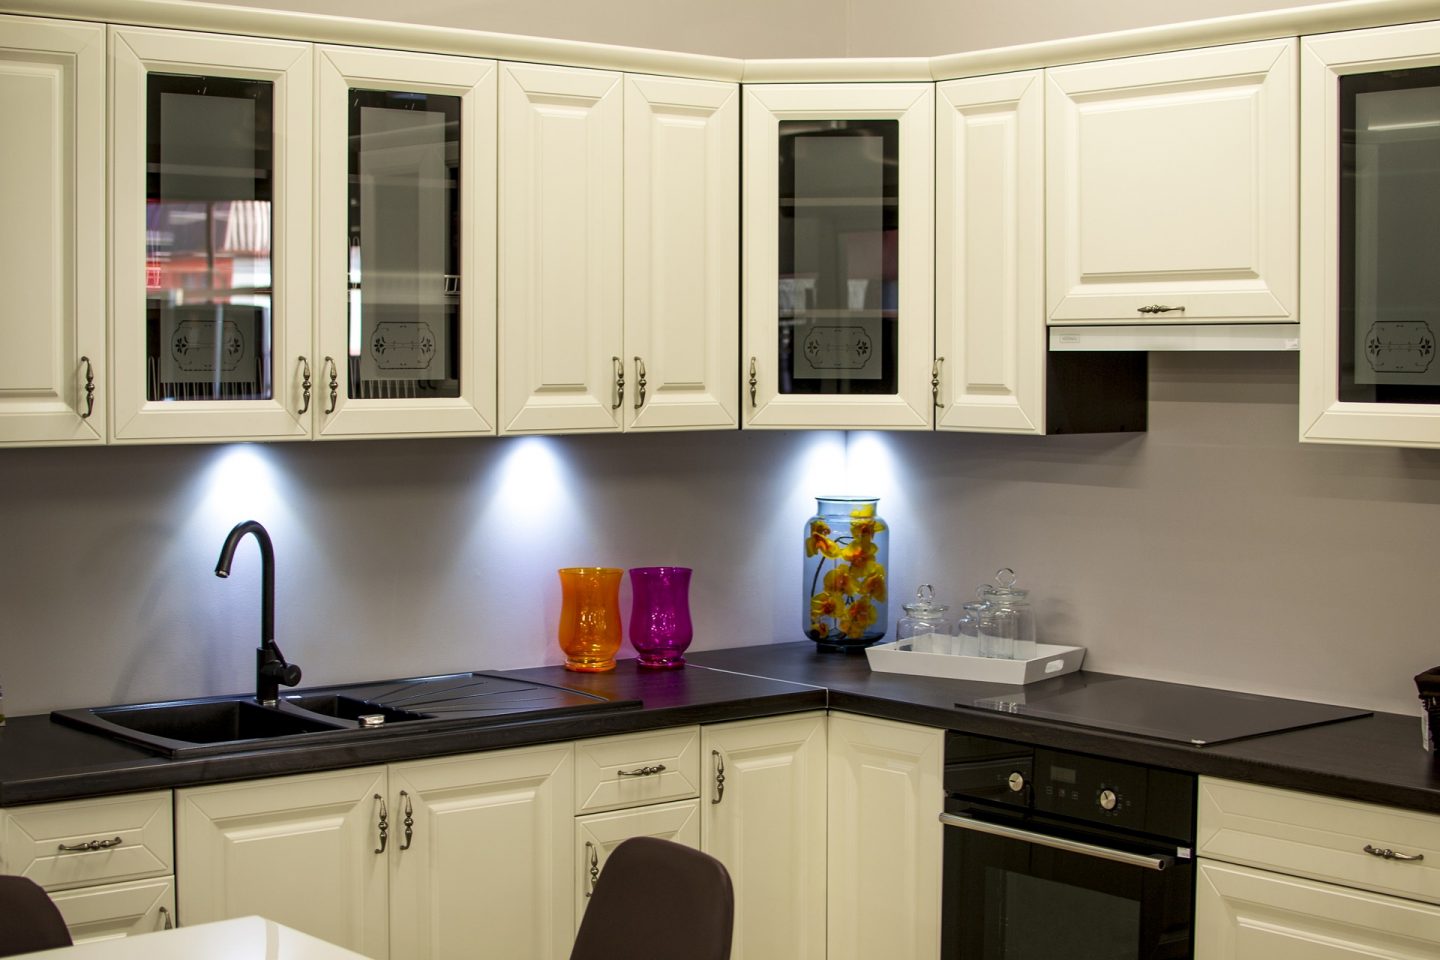 6 Things You Should Know Before Painting Your Kitchen Cabinets